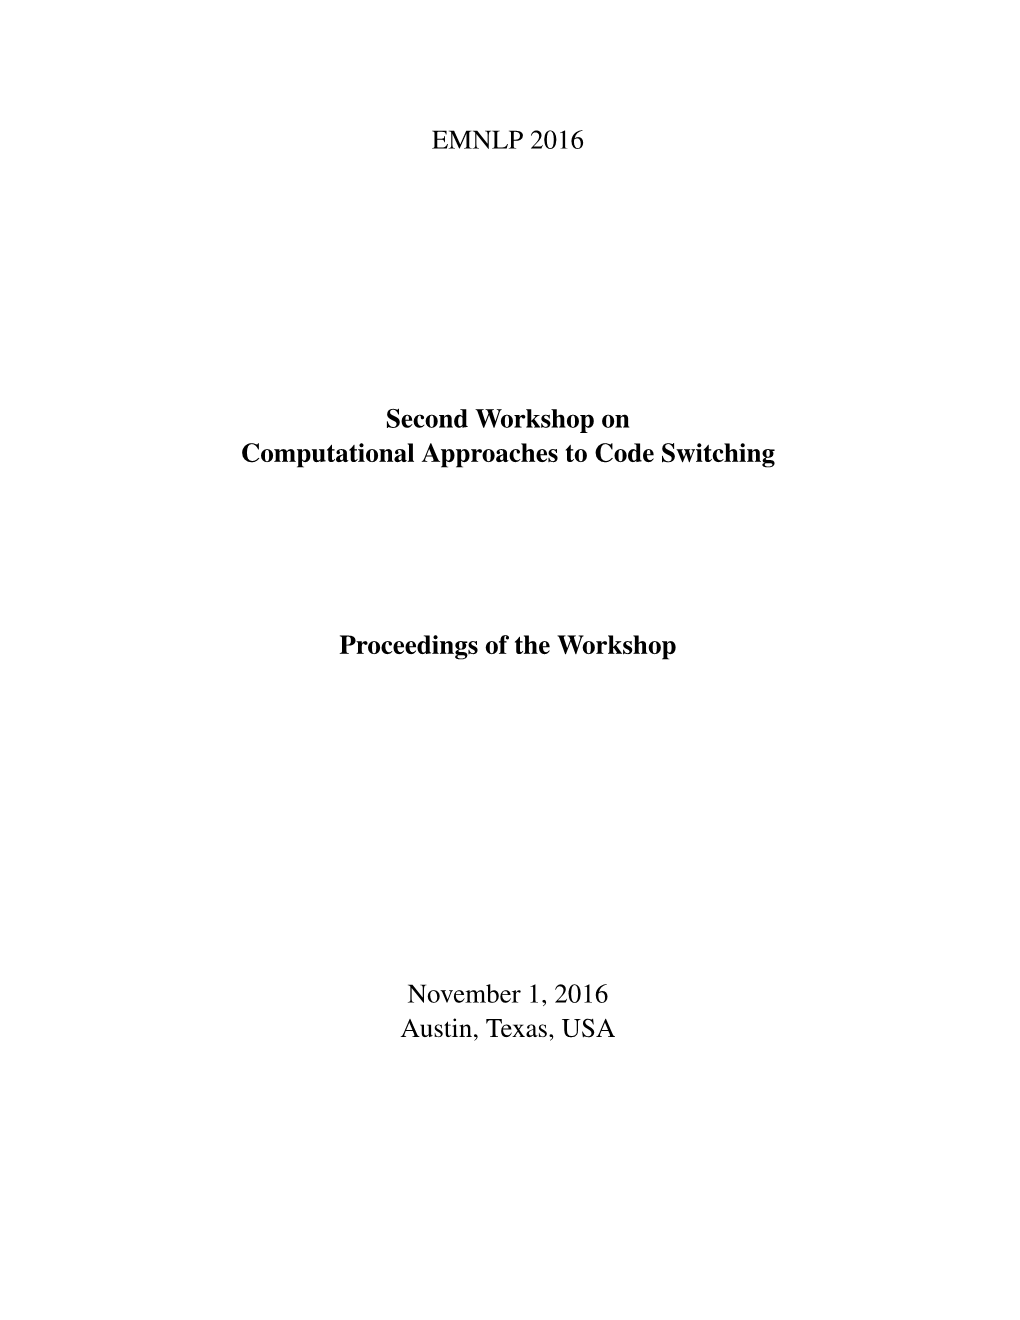 Proceedings of the Second Workshop on Computational Approaches to Code Switching, Pages 1–11, Austin, TX, November 1, 2016